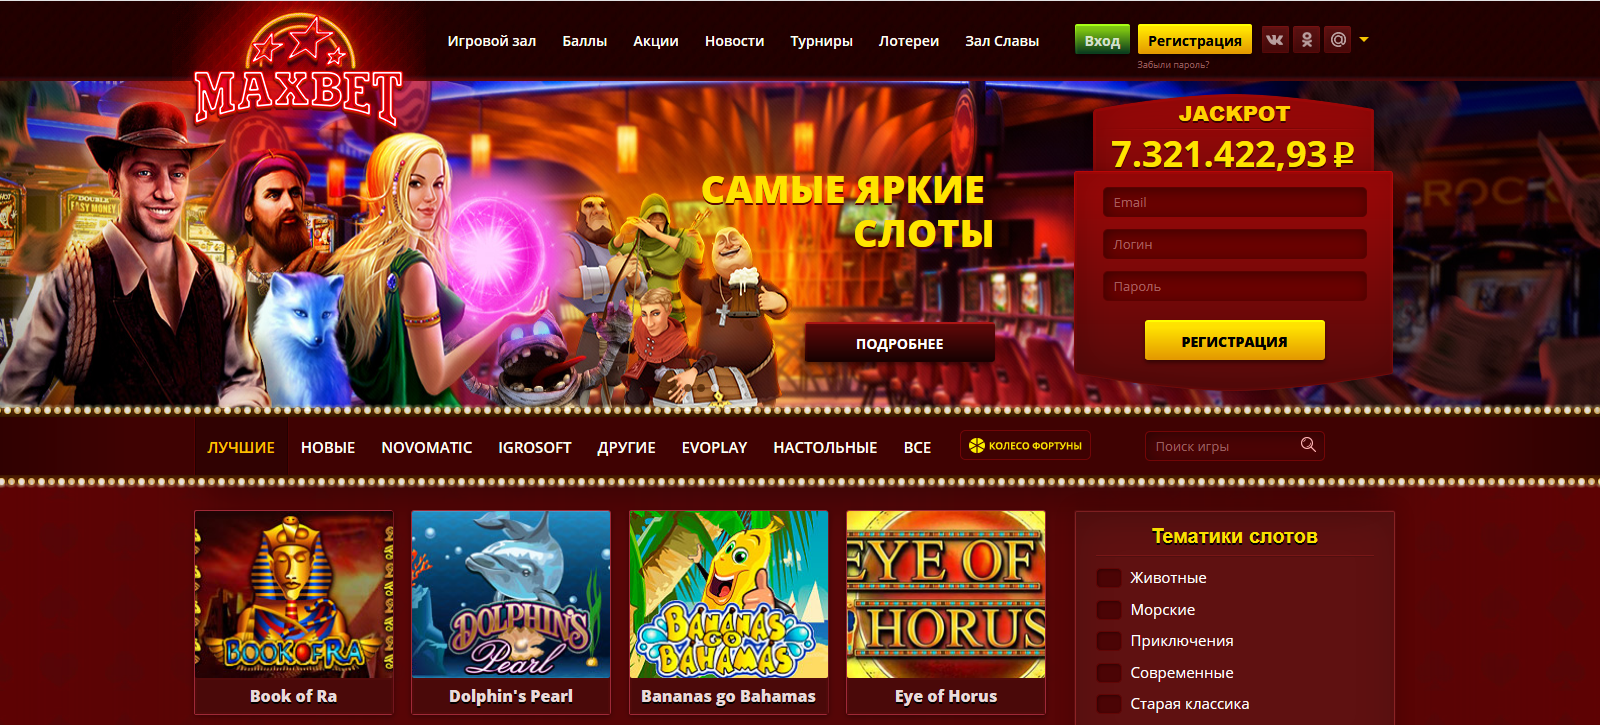 maxbet online максбет слотс3 ксыз0 1